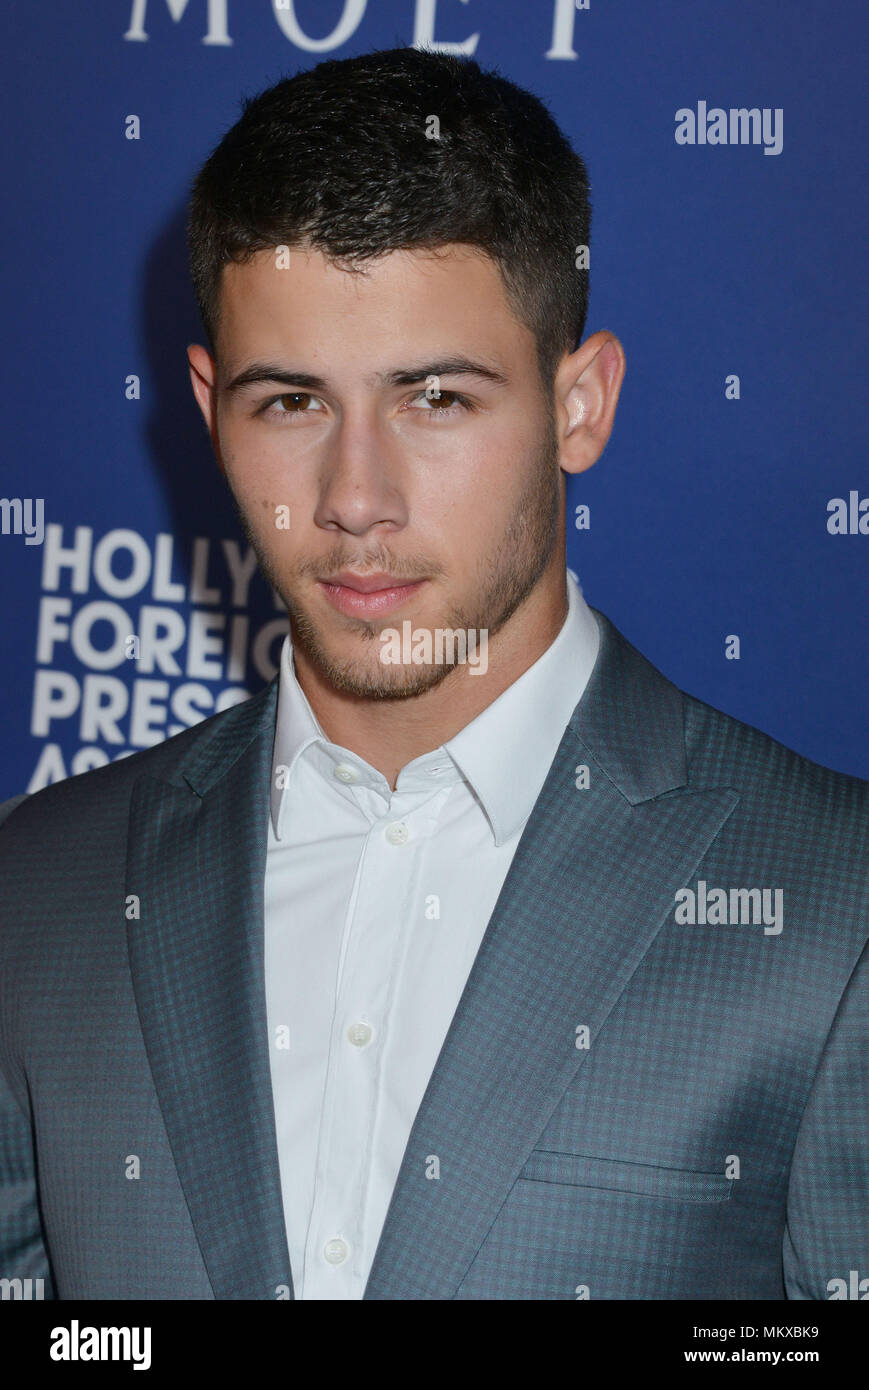 Nick jonas event in hollywood life california hi-res stock photography and  images - Alamy